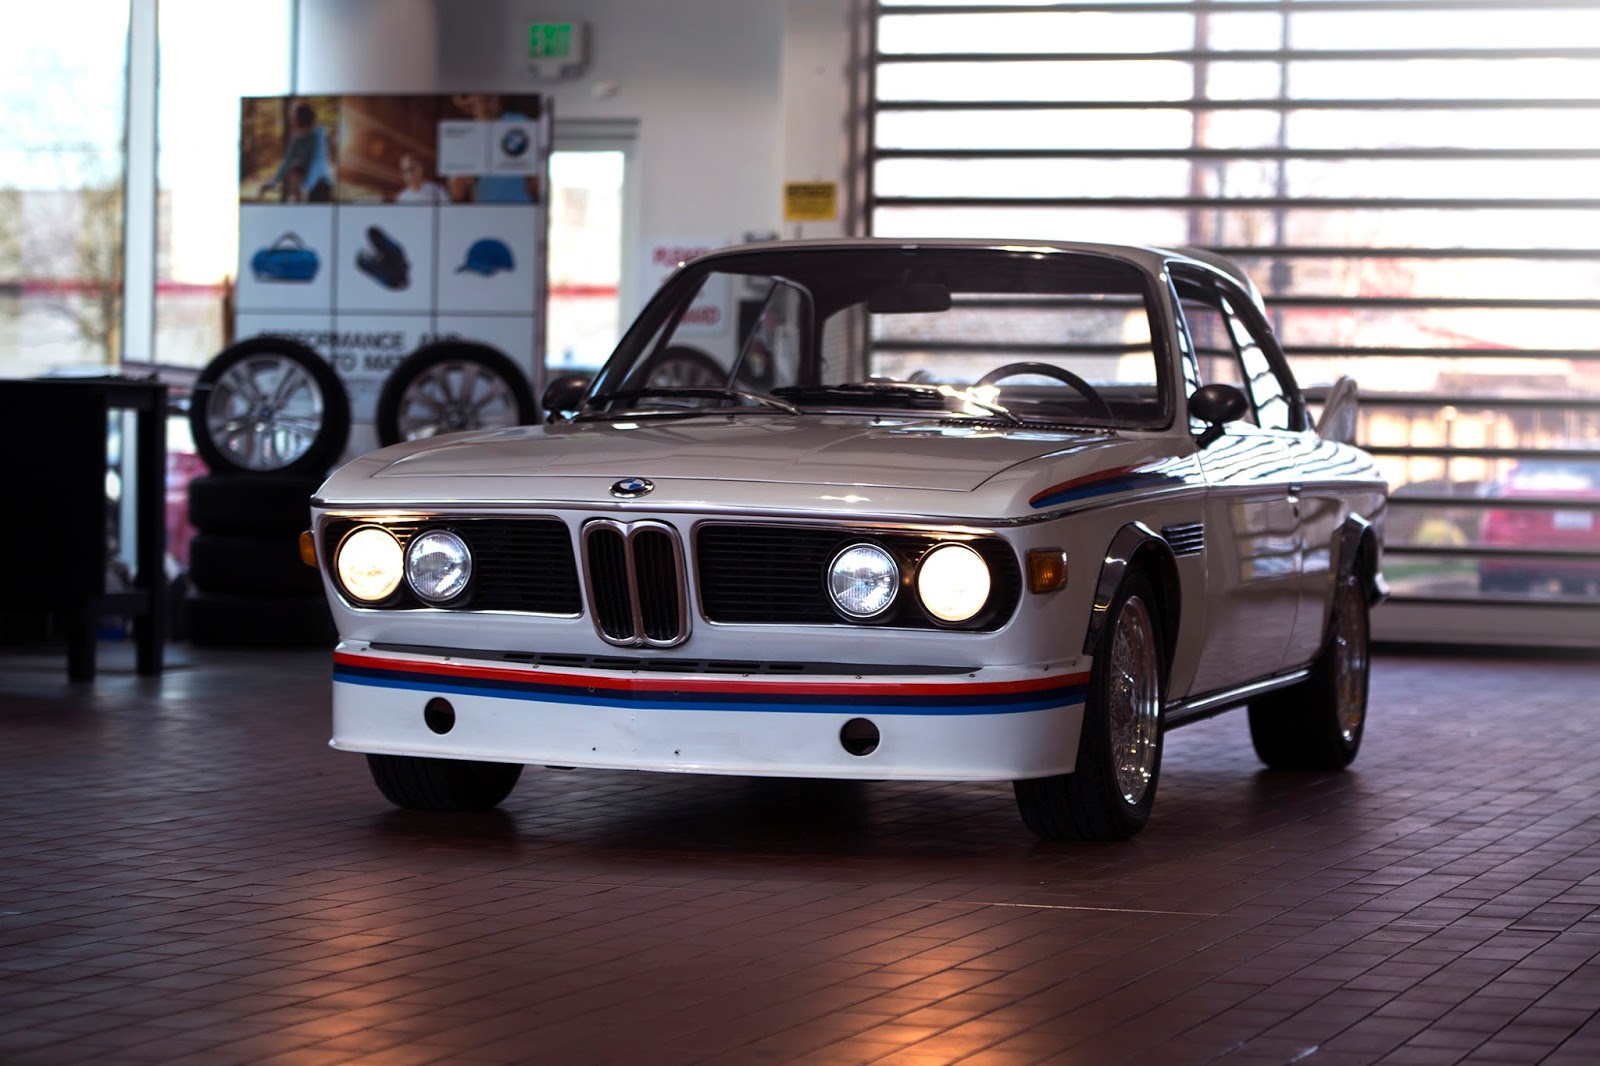 The Ultimate Driving Machine: 2005 BMW M5